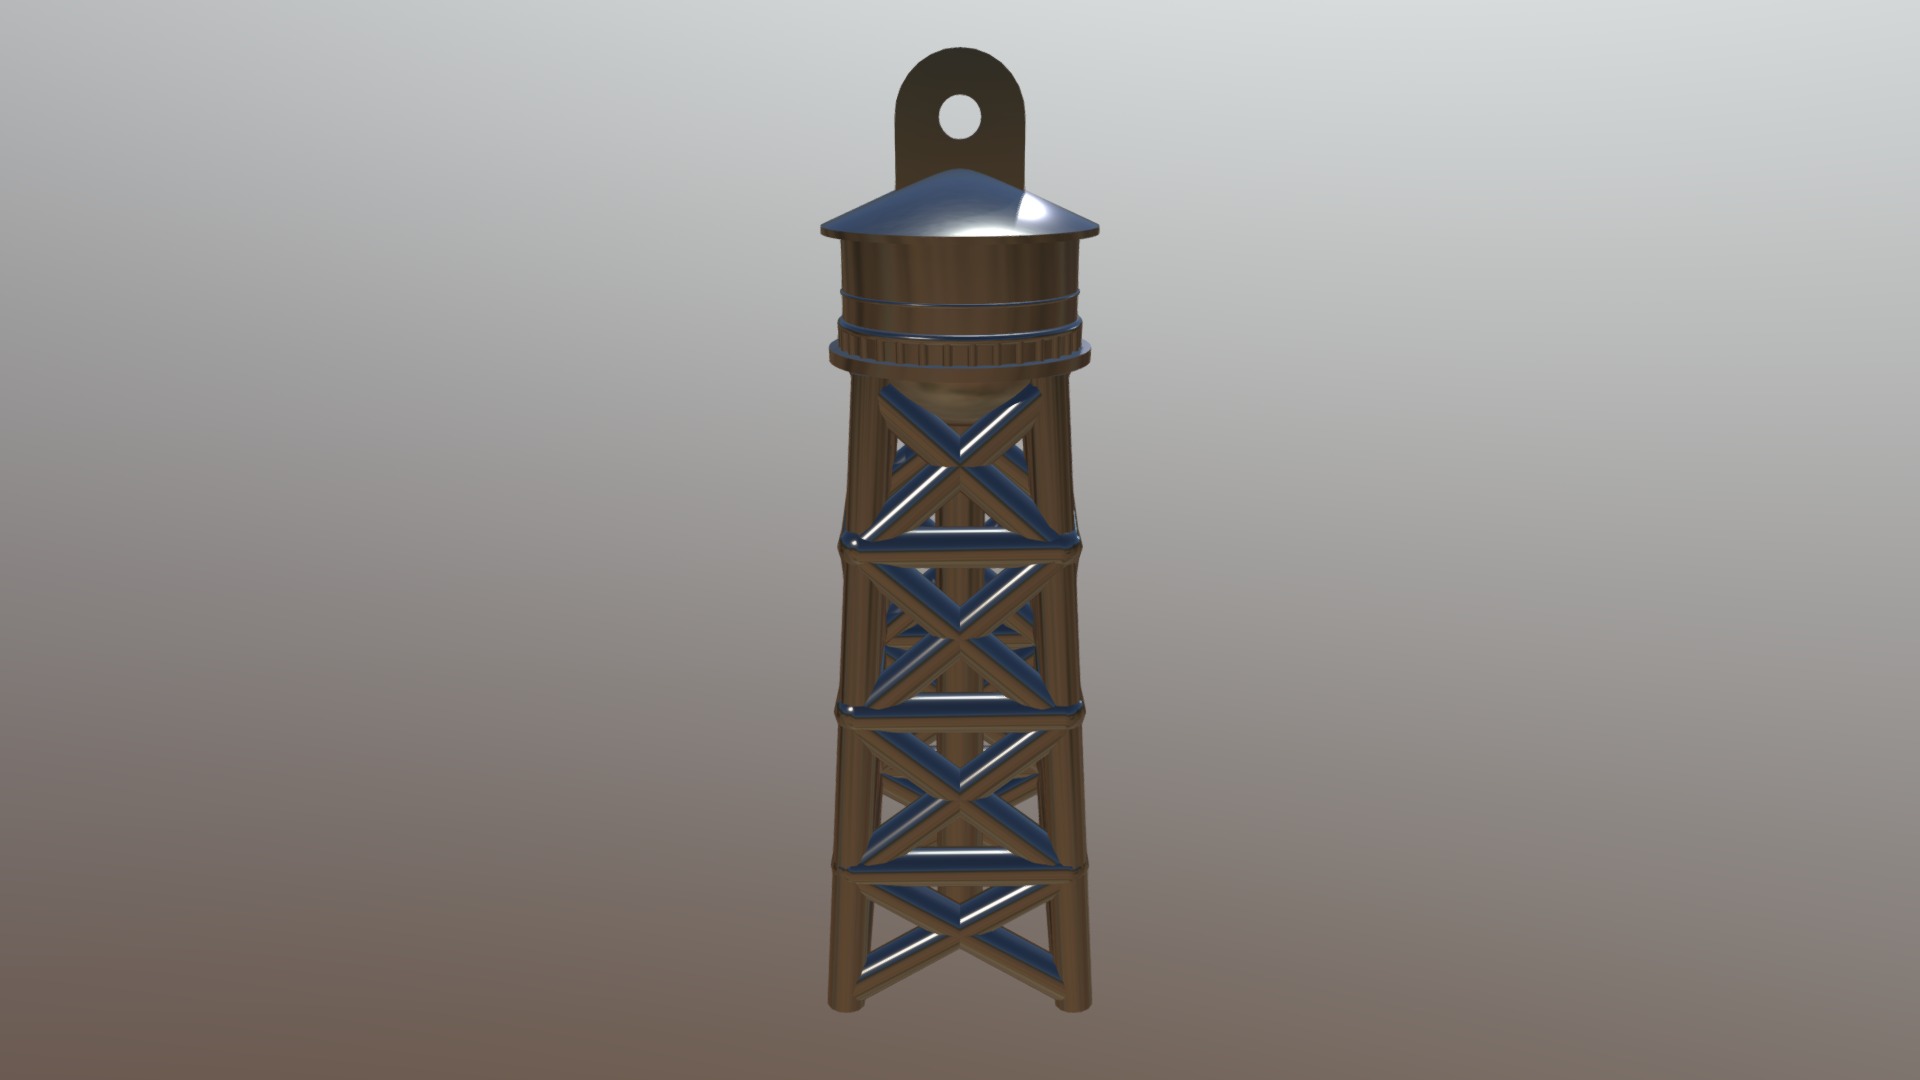 3D model Greenpoint Water Tower- 1 Inch (1) pendant - This is a 3D model of the Greenpoint Water Tower- 1 Inch (1) pendant. The 3D model is about a blue and white tower.